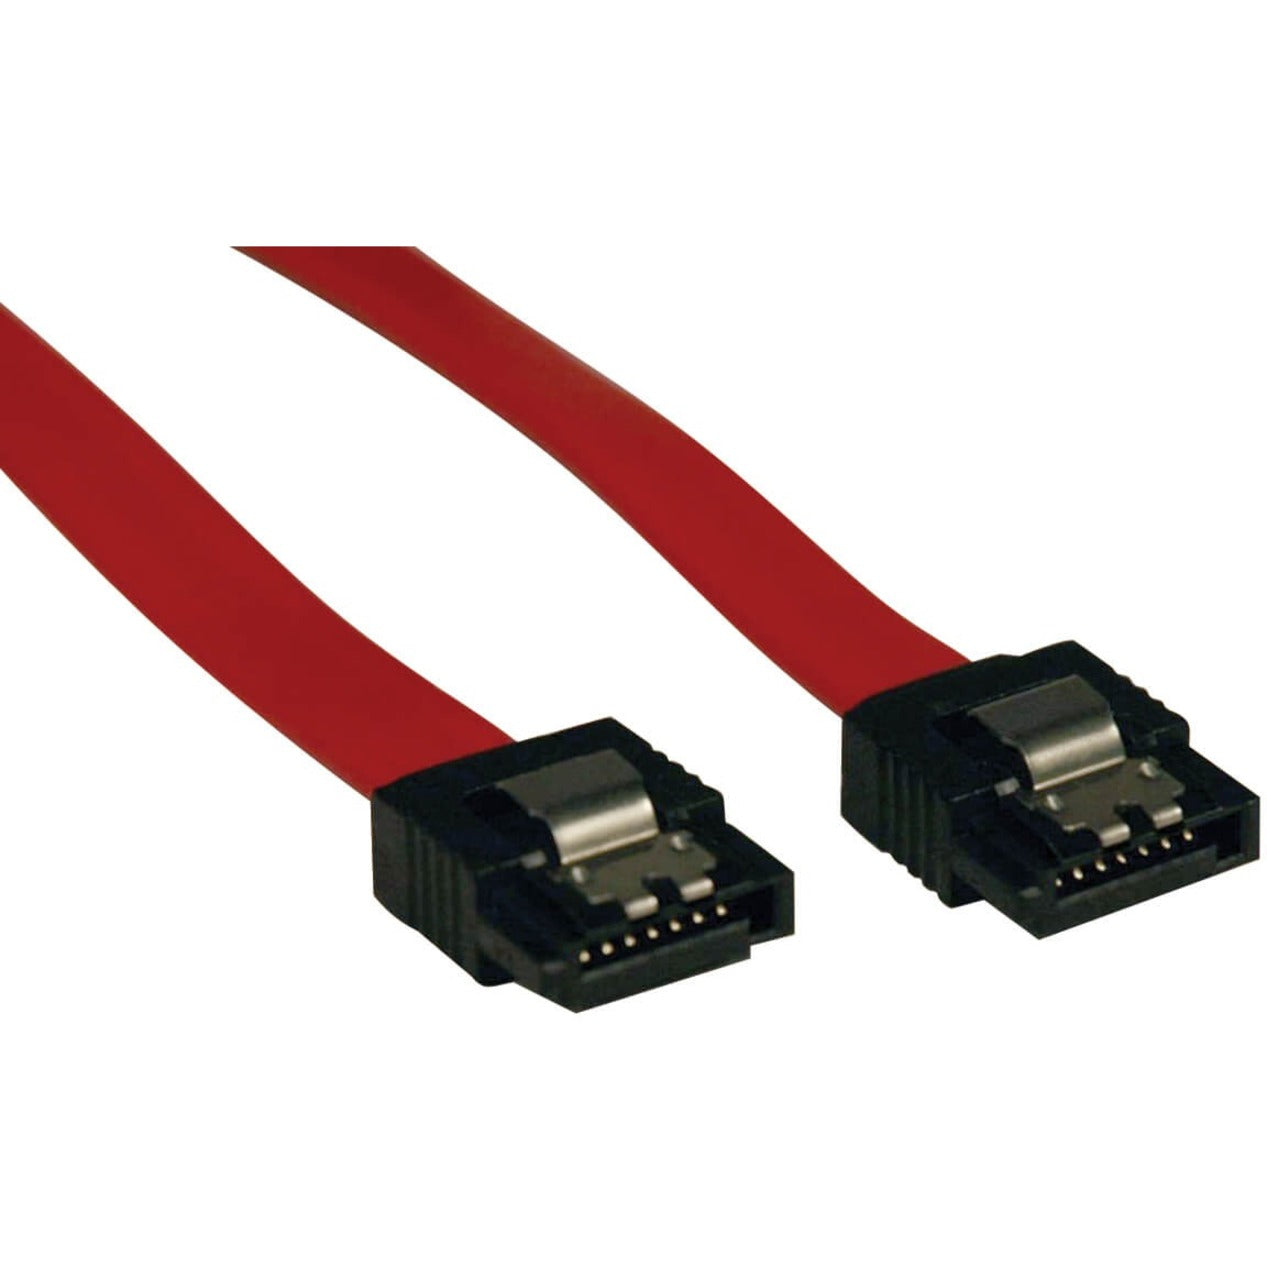 Tripp Lite P940-19I Serial ATA (7-pin) Cable 19-in. Signal Cable 7Pin/7Pin Tripp Lite => Tripp Lite P940-19I Serial ATA (7-pin) Cable => Câble SATA (7 broches) P940-19I 19-in. Signal Cable => Câble de signal 19 pouces 7Pin/7Pin => 7 broches/7 broches